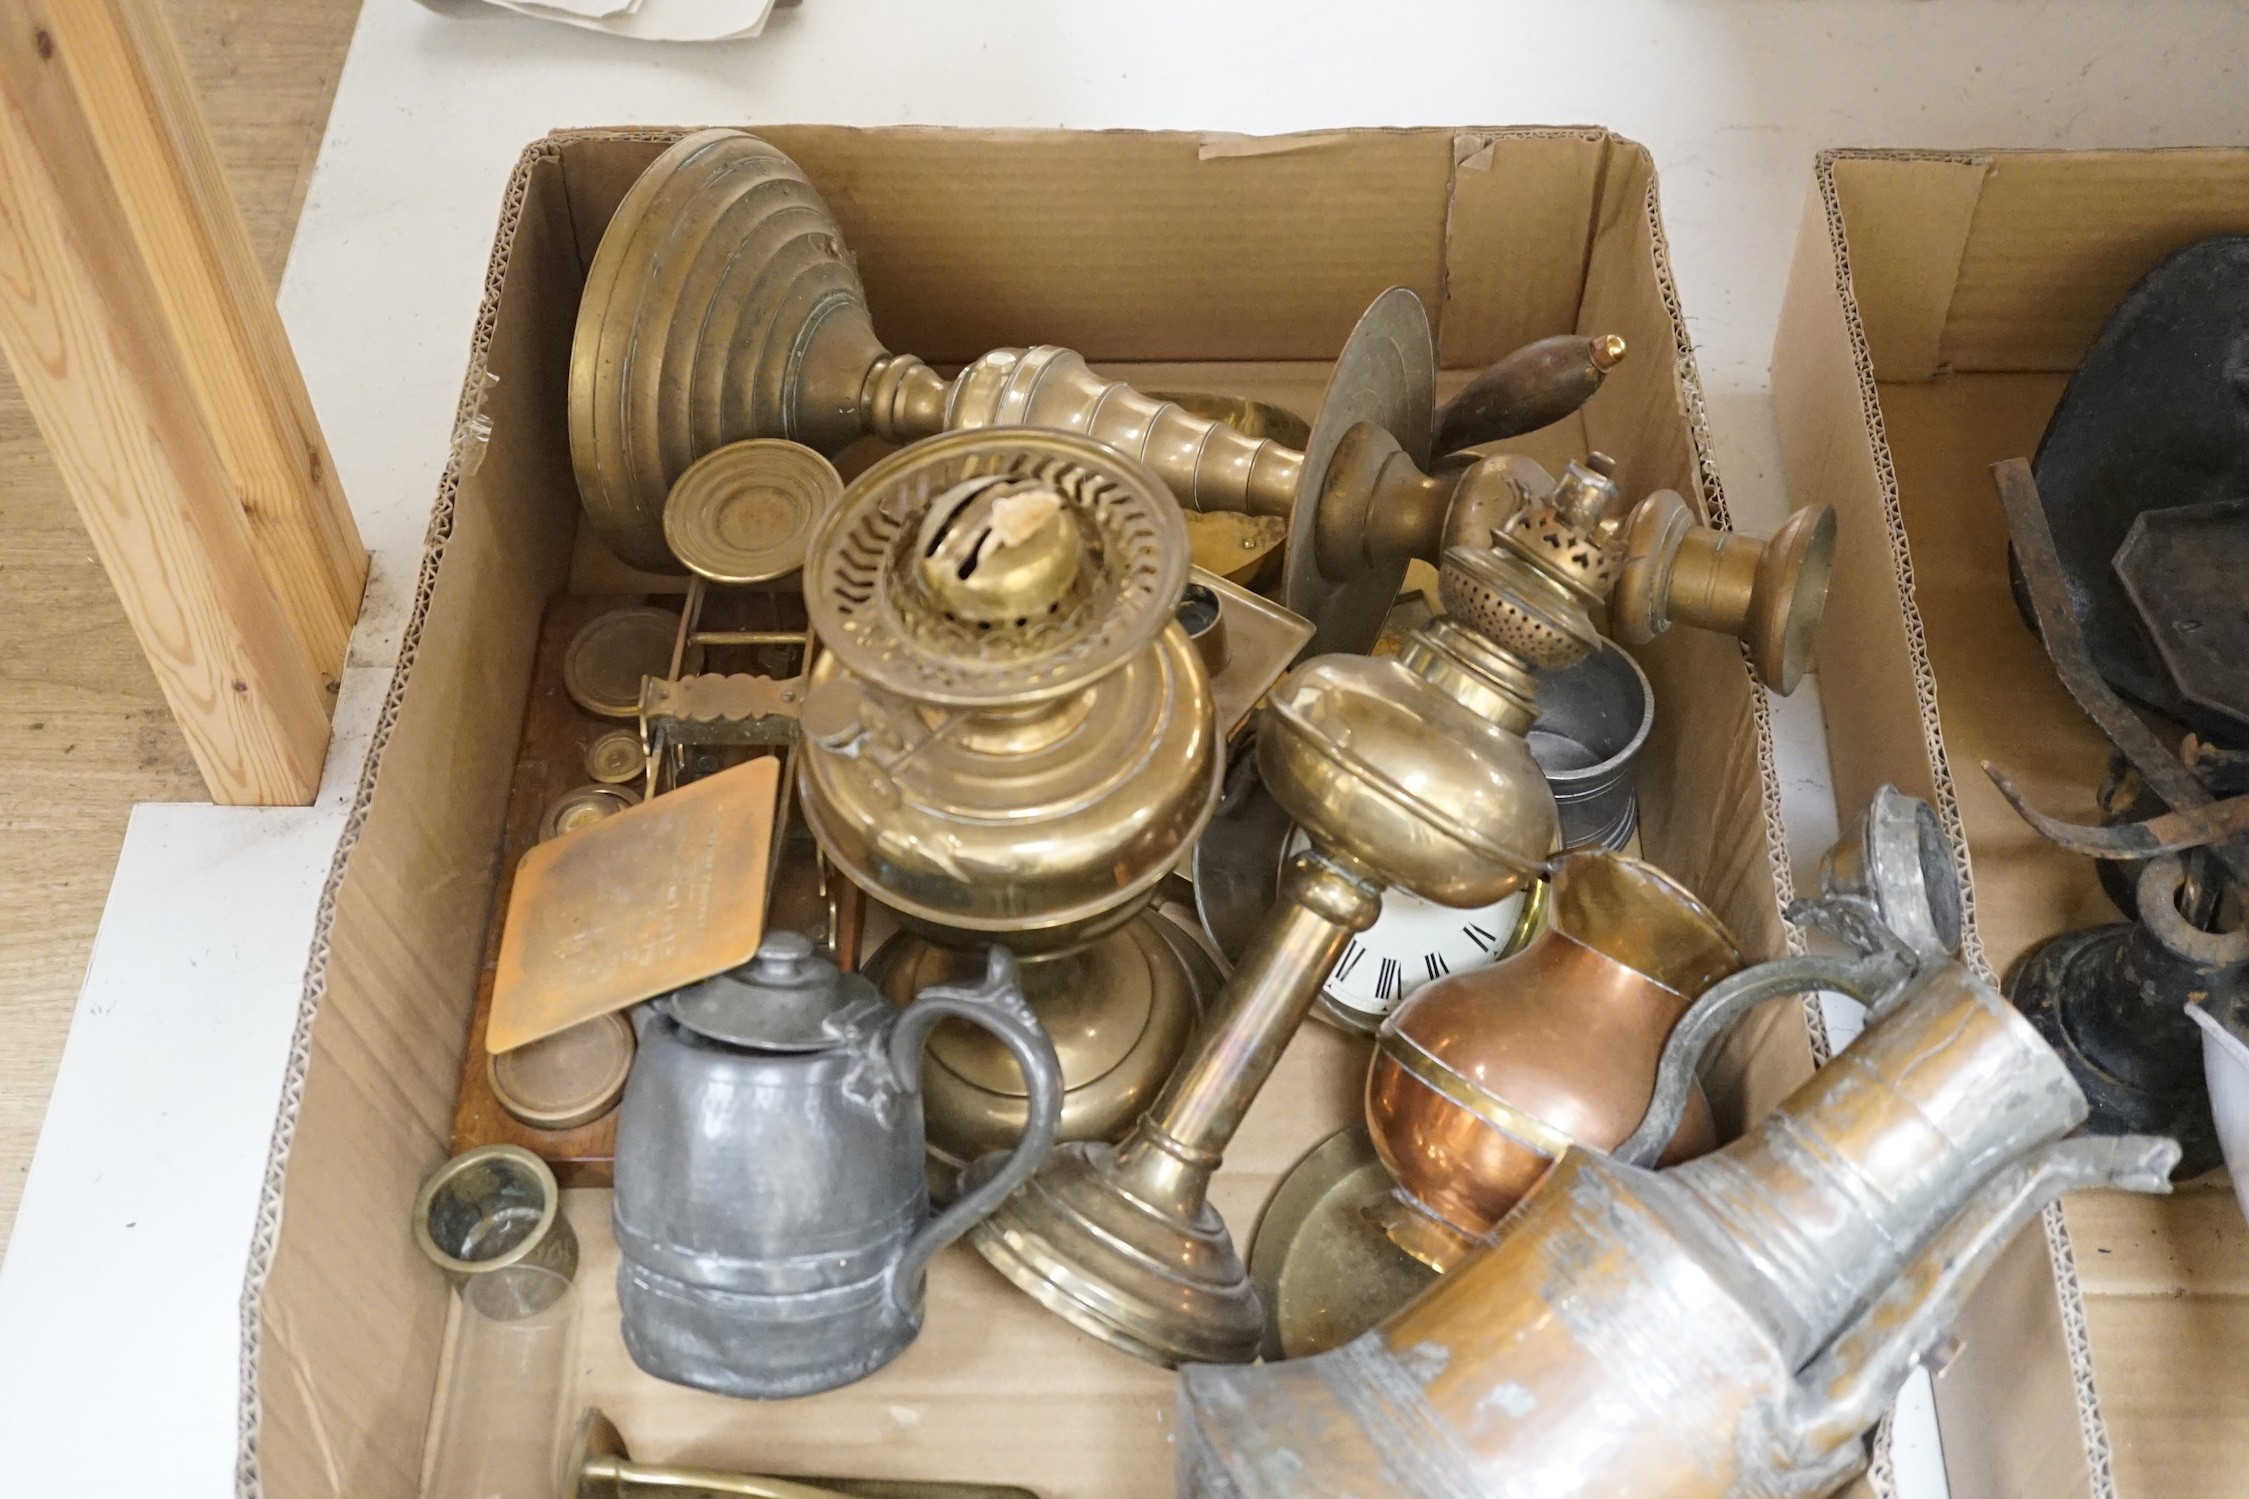 A selection of brass wares, to include an Art Nouveau style ink stand, a Parkins & Gotts postal scales, oil lamps, and other